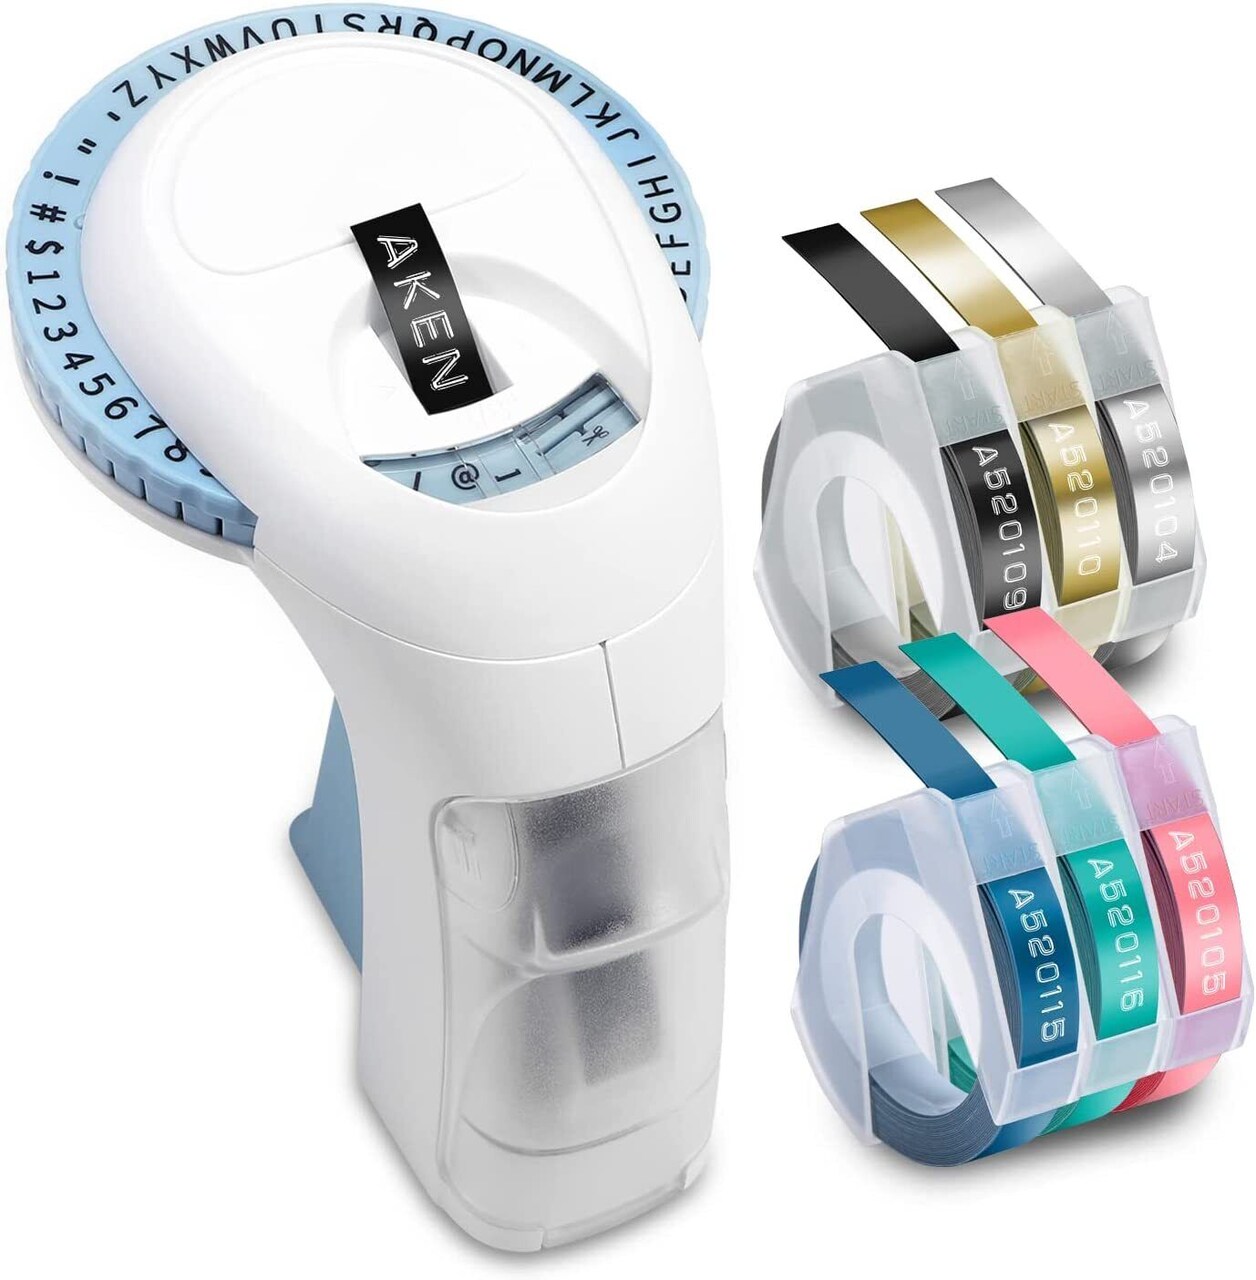 Embossing Label Maker with 6 Label Tapes